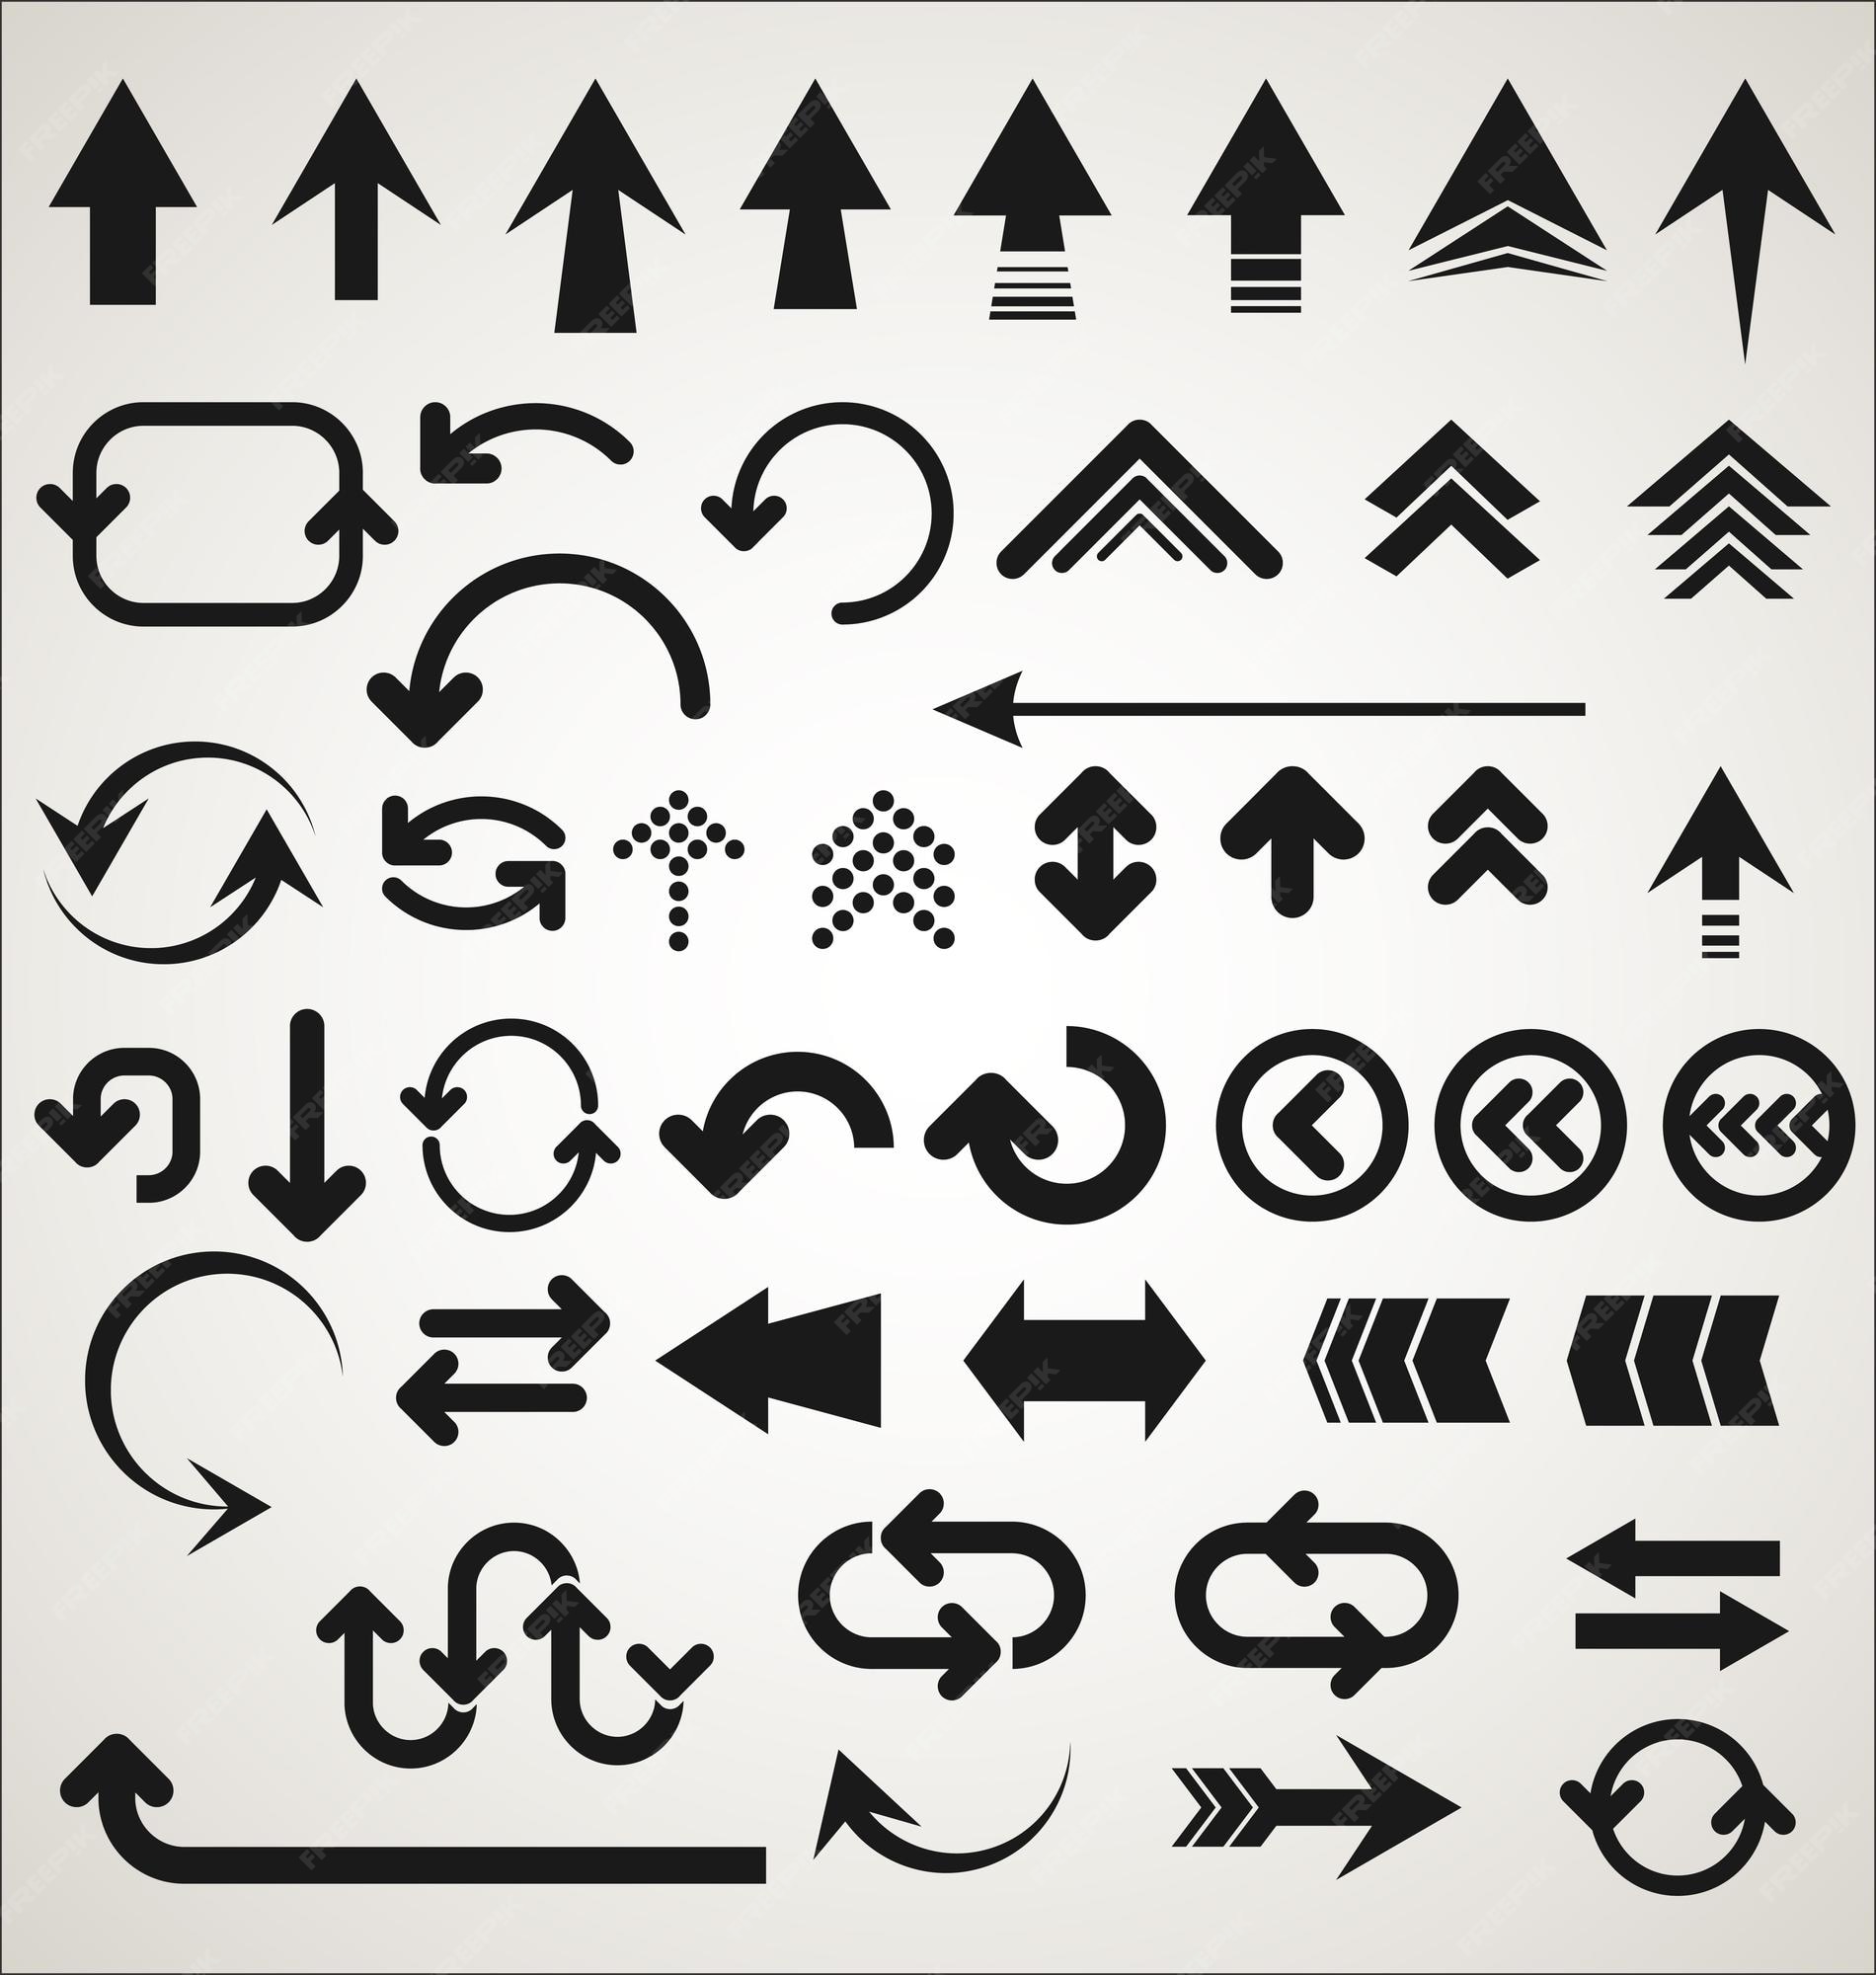 arrow shapes for photoshop cc free download